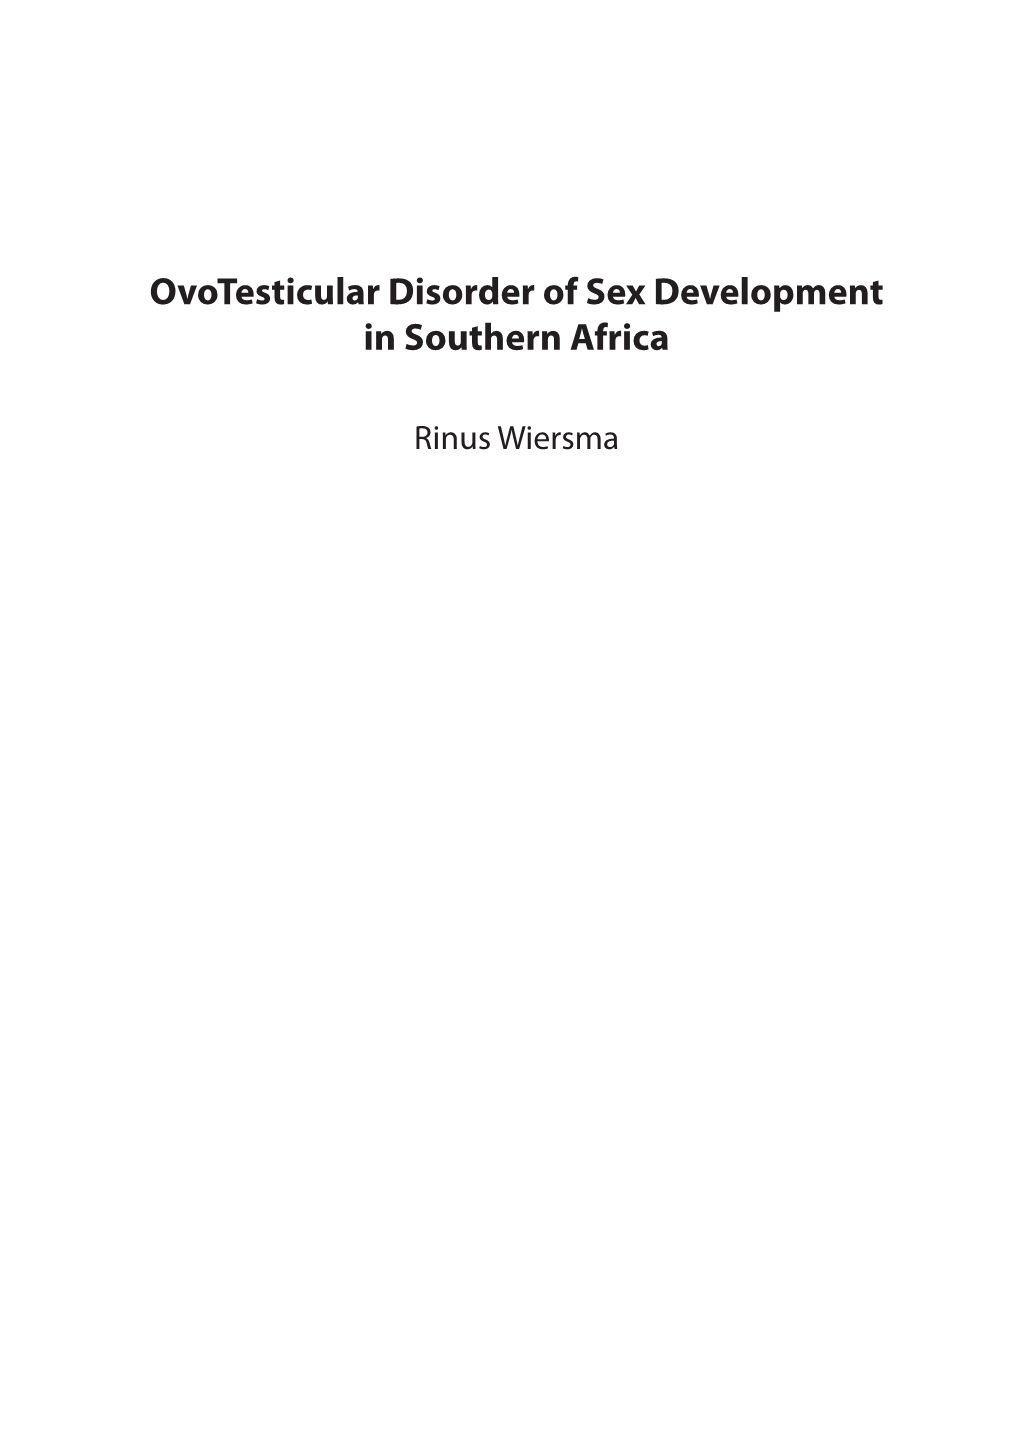 Ovotesticular Disorder of Sex Development in Southern Africa